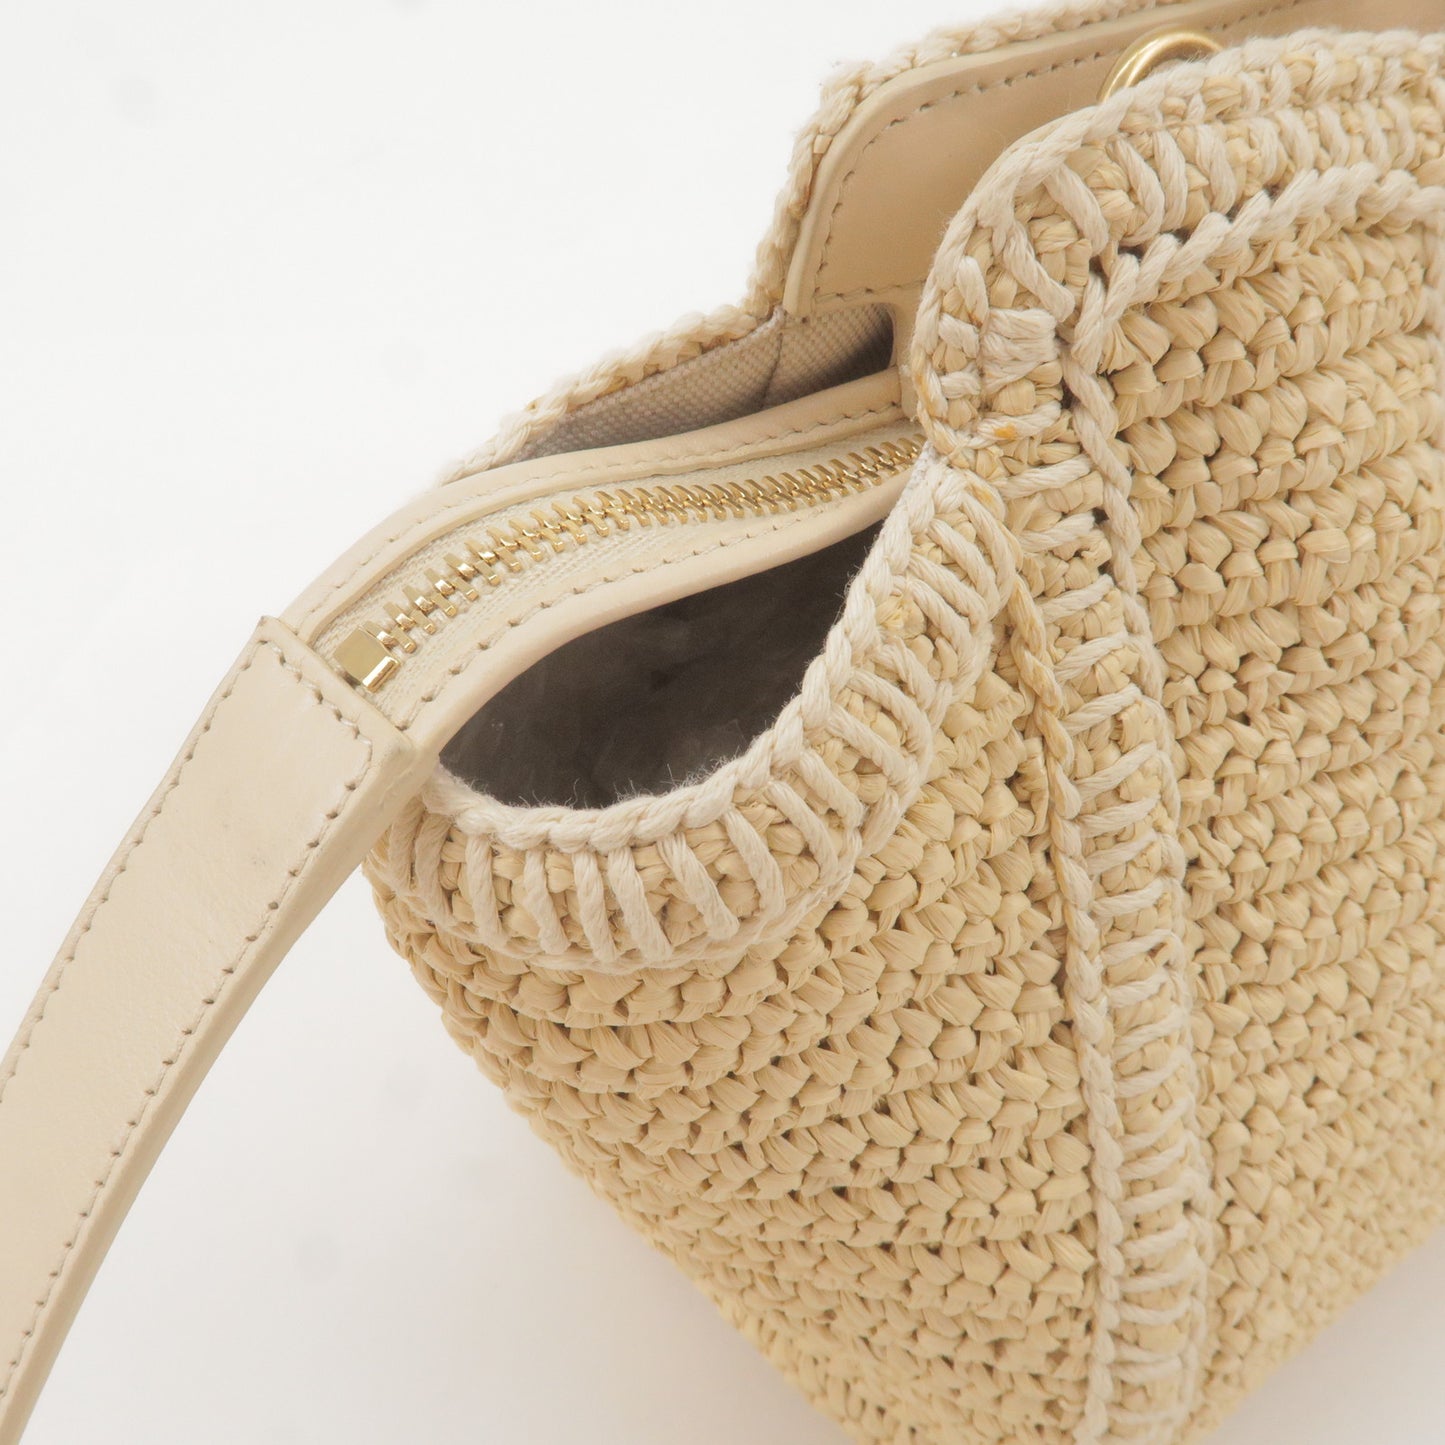 Natural Downtown Baby Cabas In Raffia And Leather – COSETTE